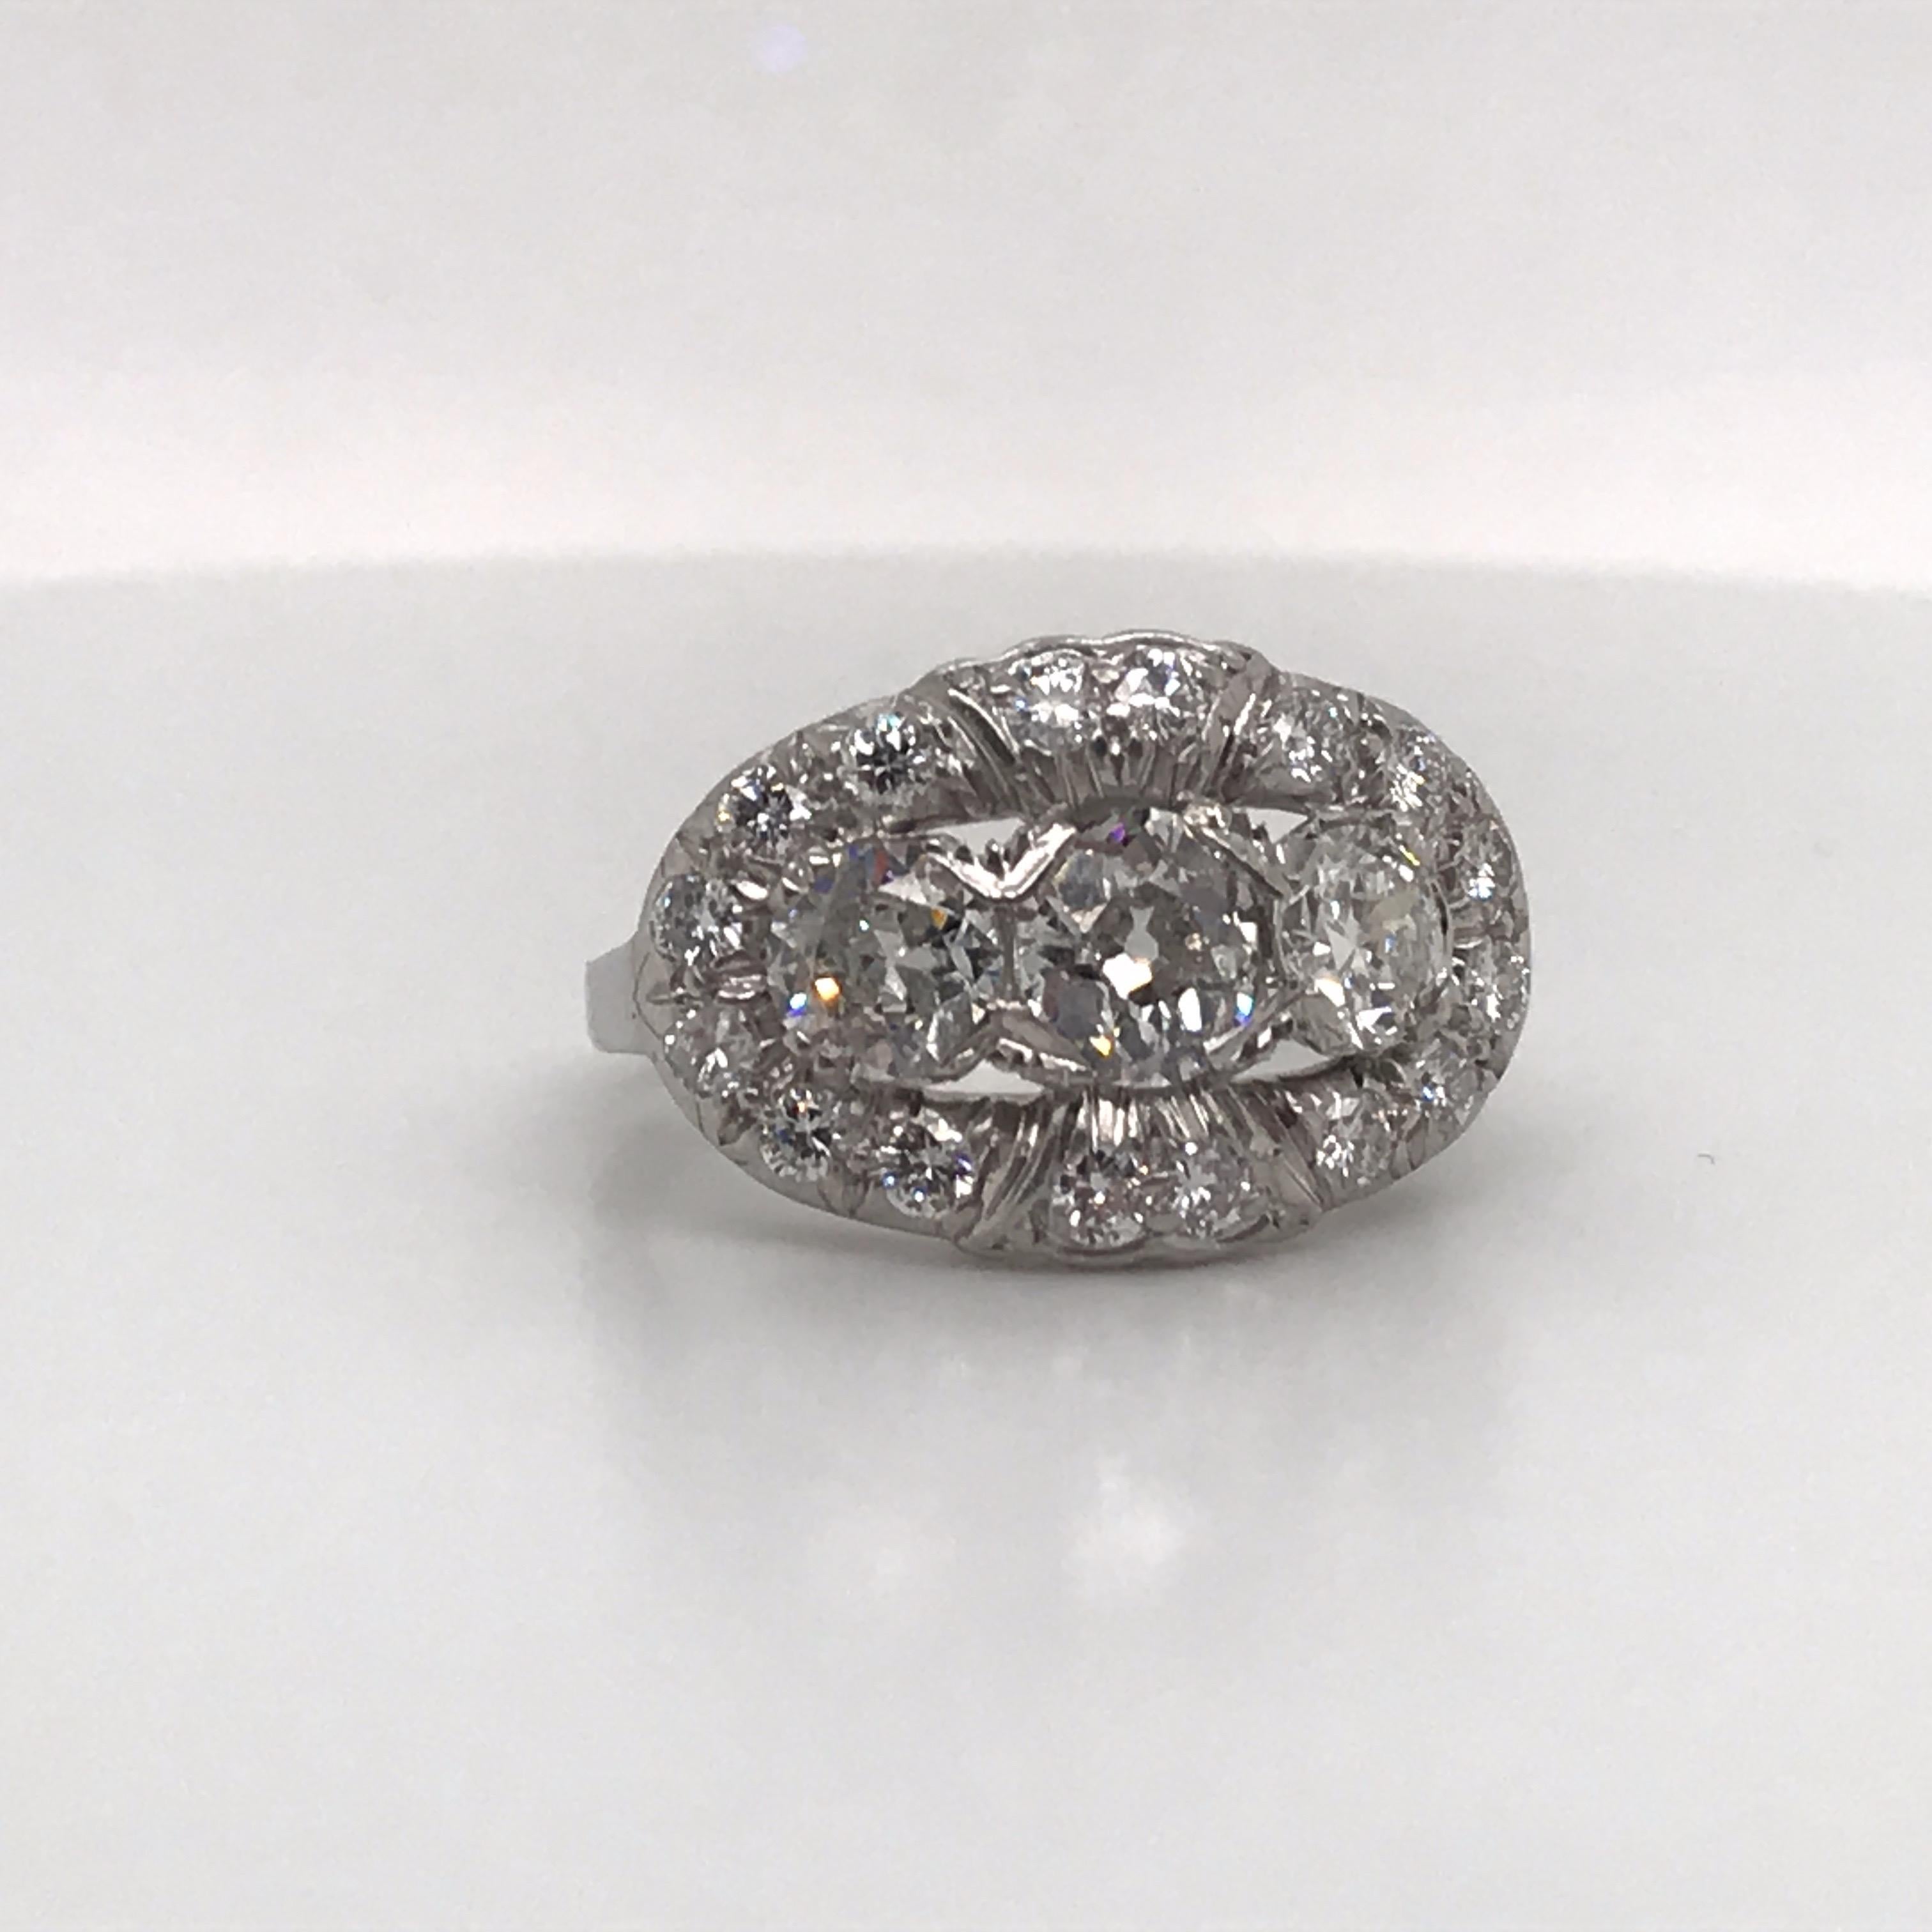 Vintage diamond ring featuring three diamonds flanked with smaller diamonds weighing approximately 2 carats, crafted in platinum.